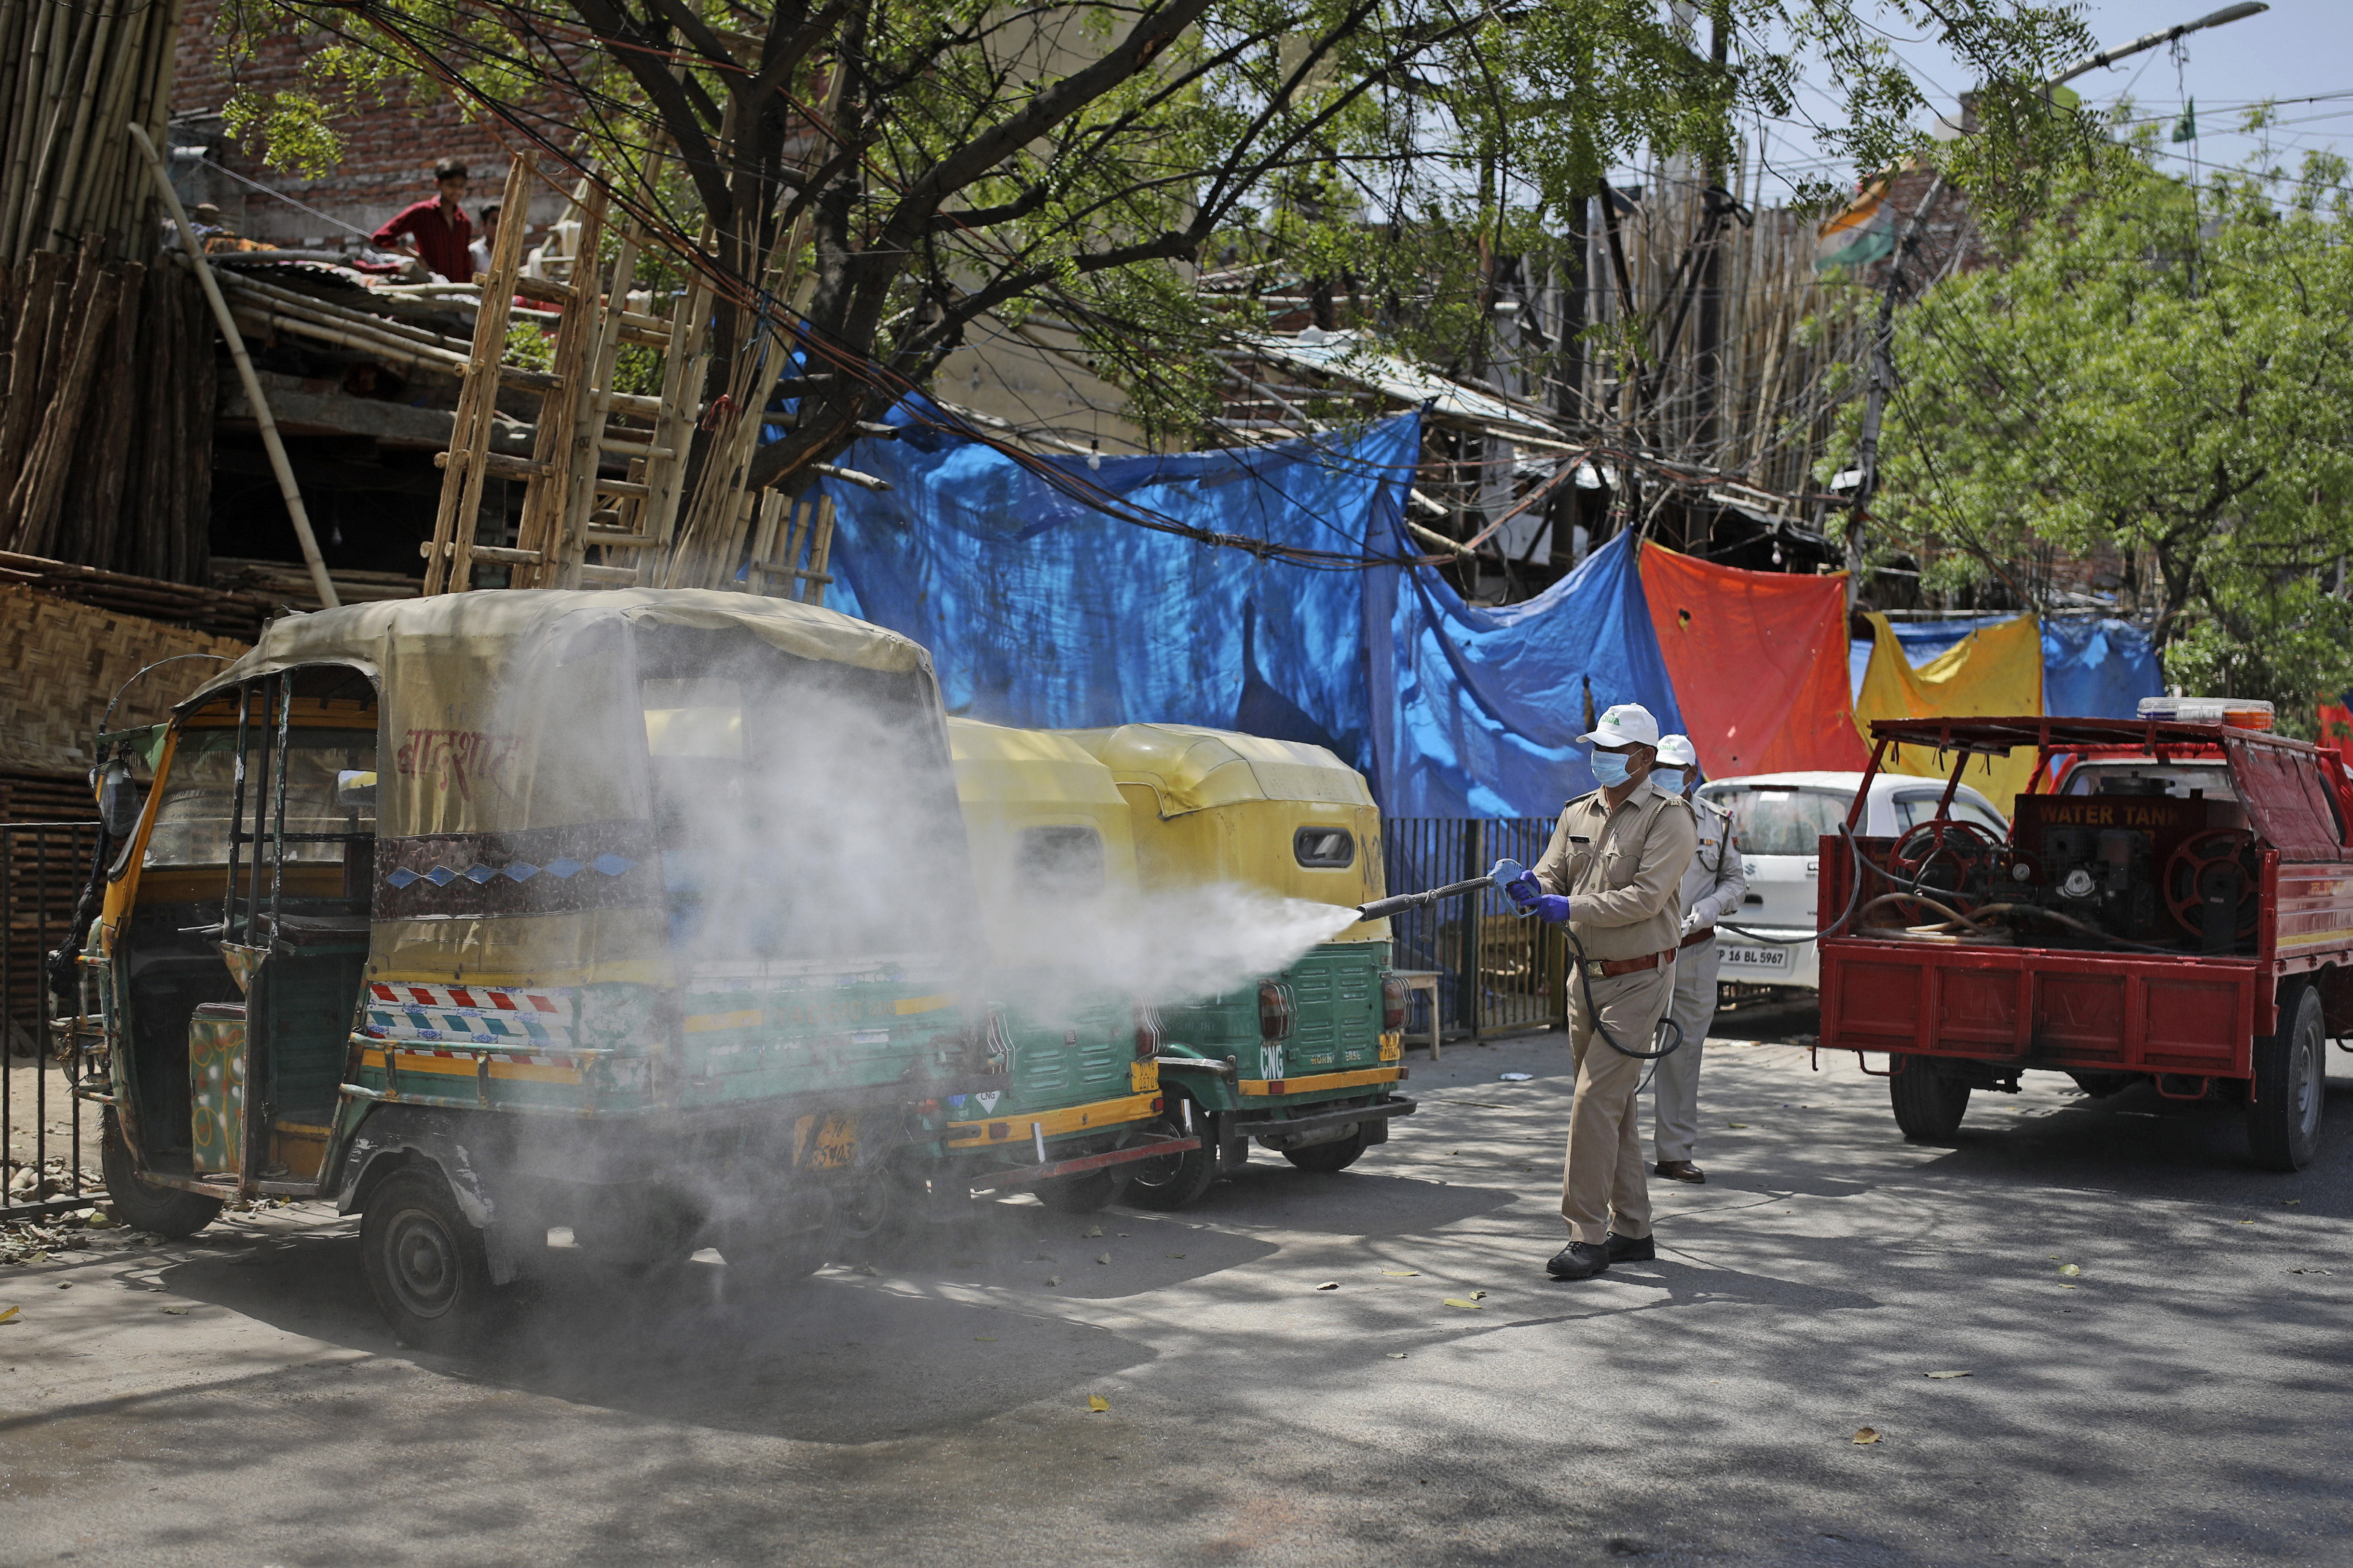 Fire brigade personnel sanitize an area following suspected cases of Covid-19 in Noida, a suburb of New Delhi, India, on April 8.